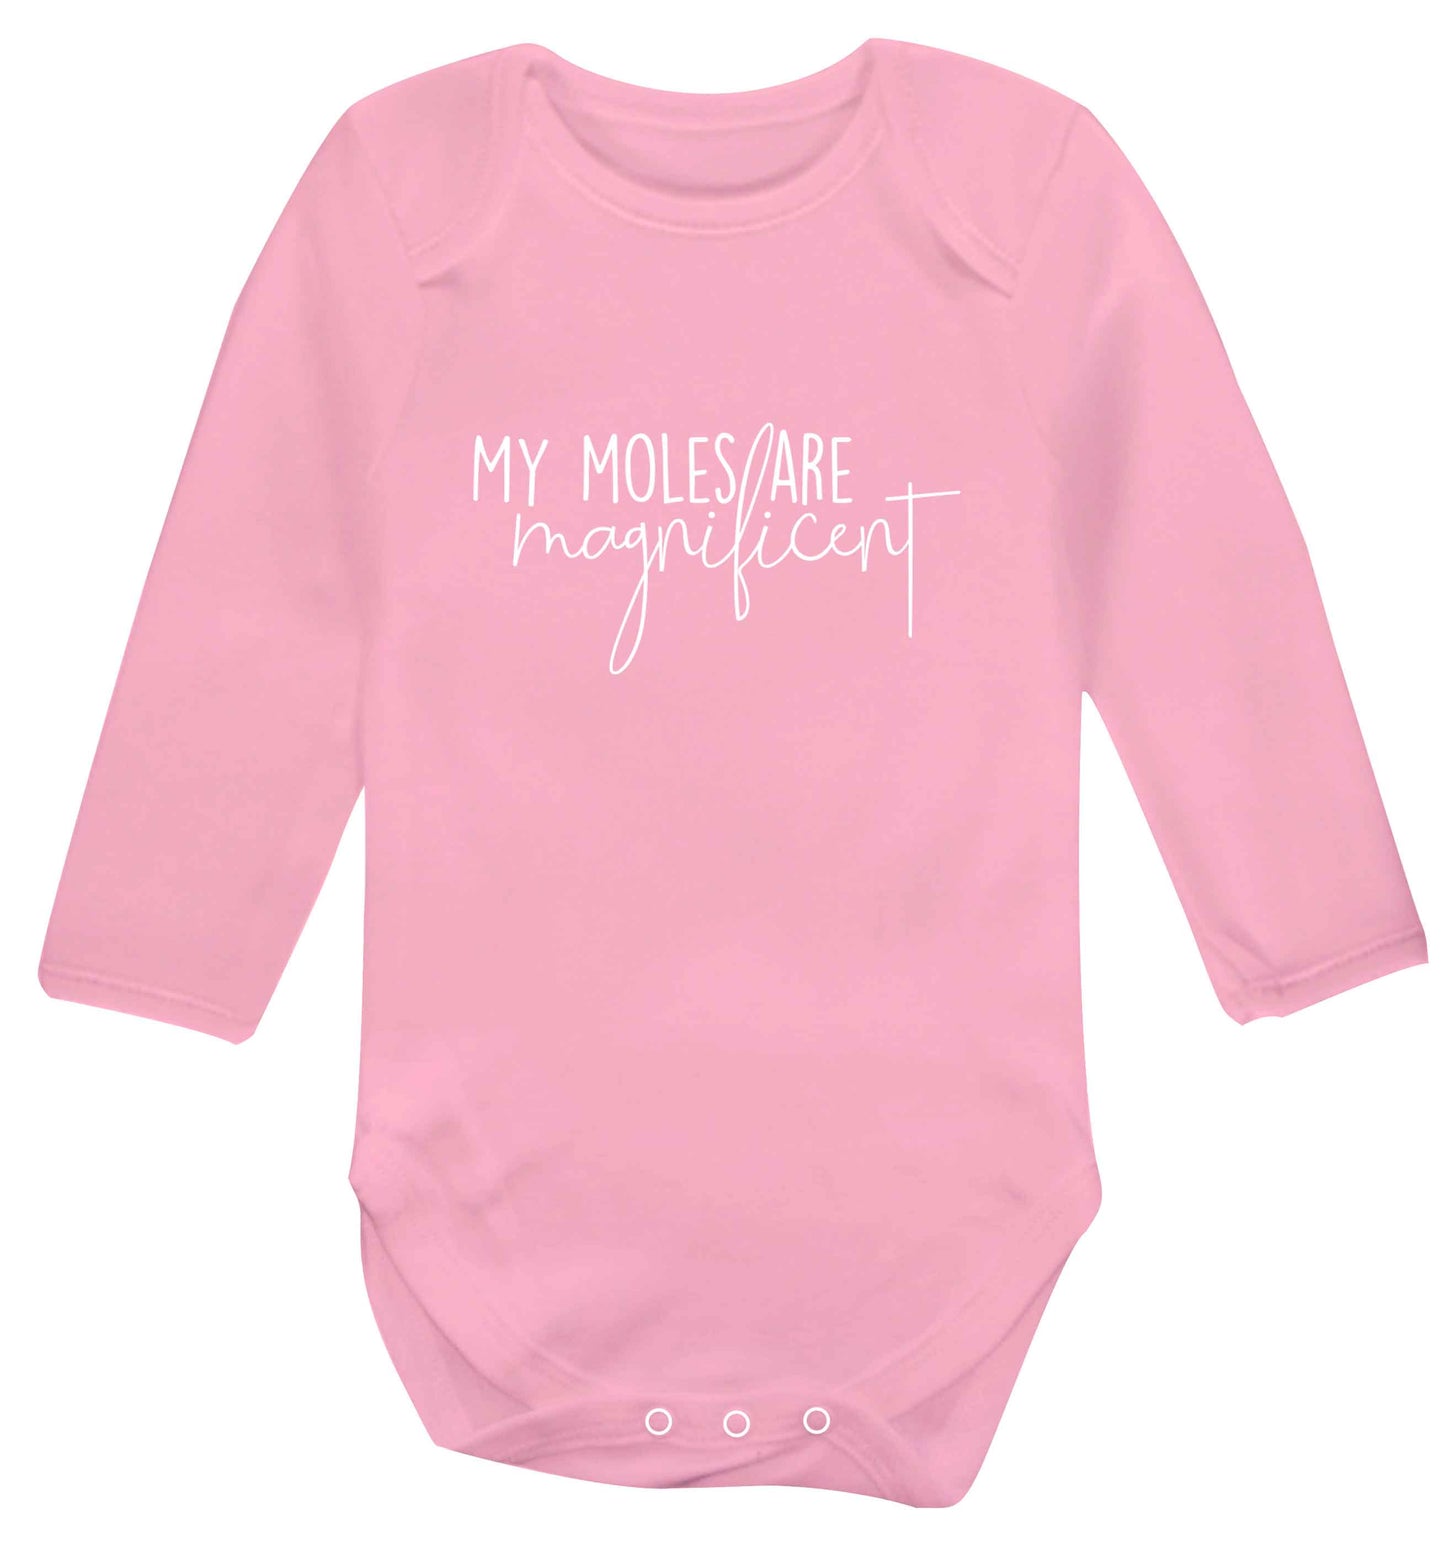 My moles are magnificent baby vest long sleeved pale pink 6-12 months